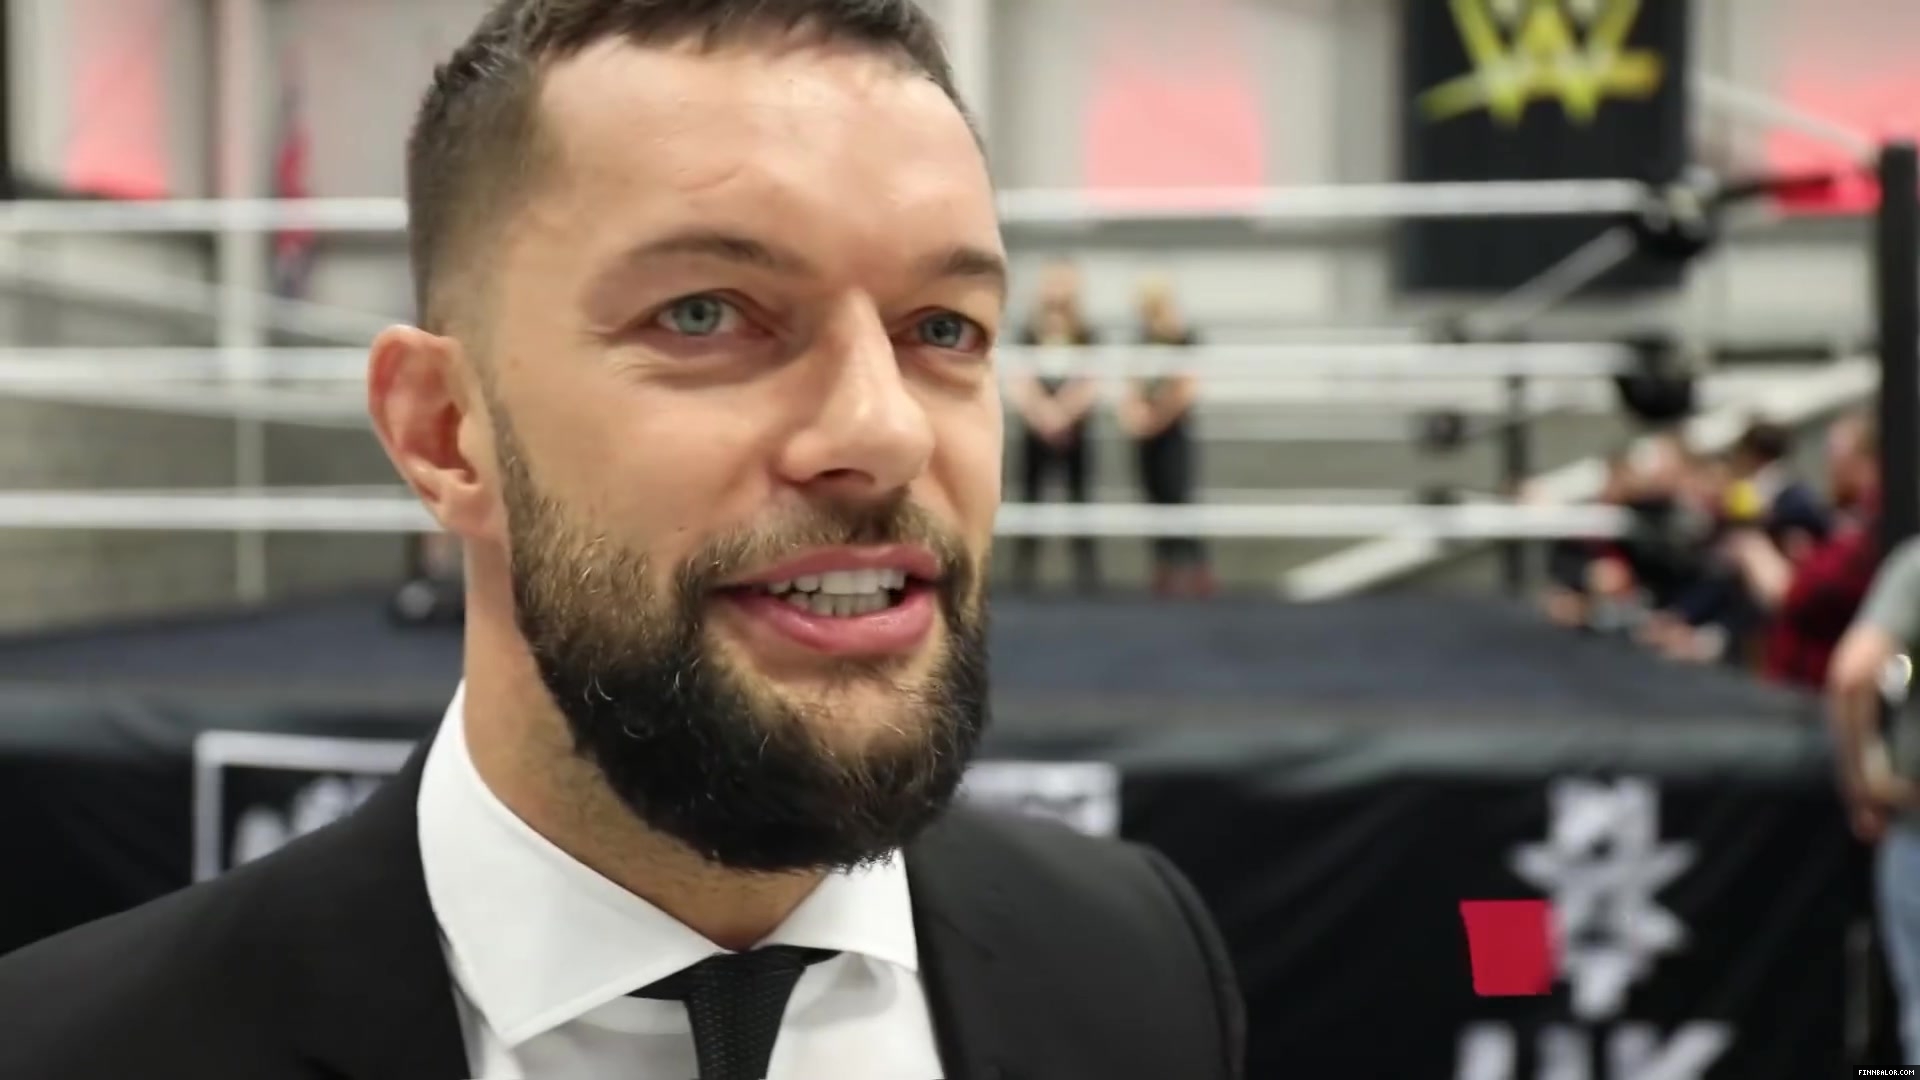 WWE_Superstar_FINN_BALOR_joins_MOUSTACHE_MOUNTAIN_at_the_opening_of_the_NXT_UK_PC_044.jpg